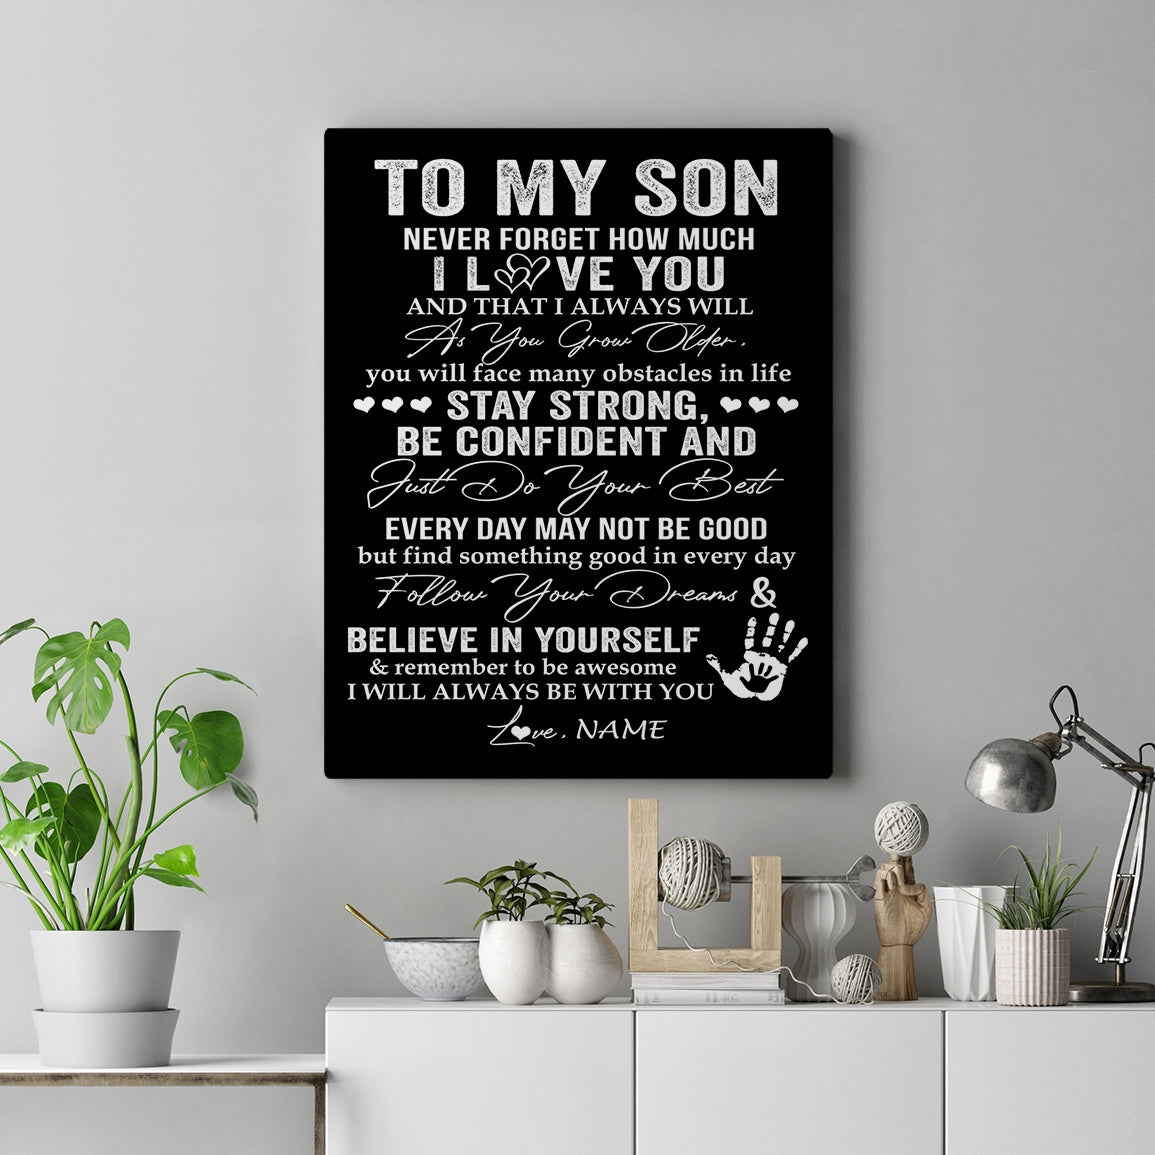 Personalized Framed Wall Art Mother and Son, Birthday Gift for Mom